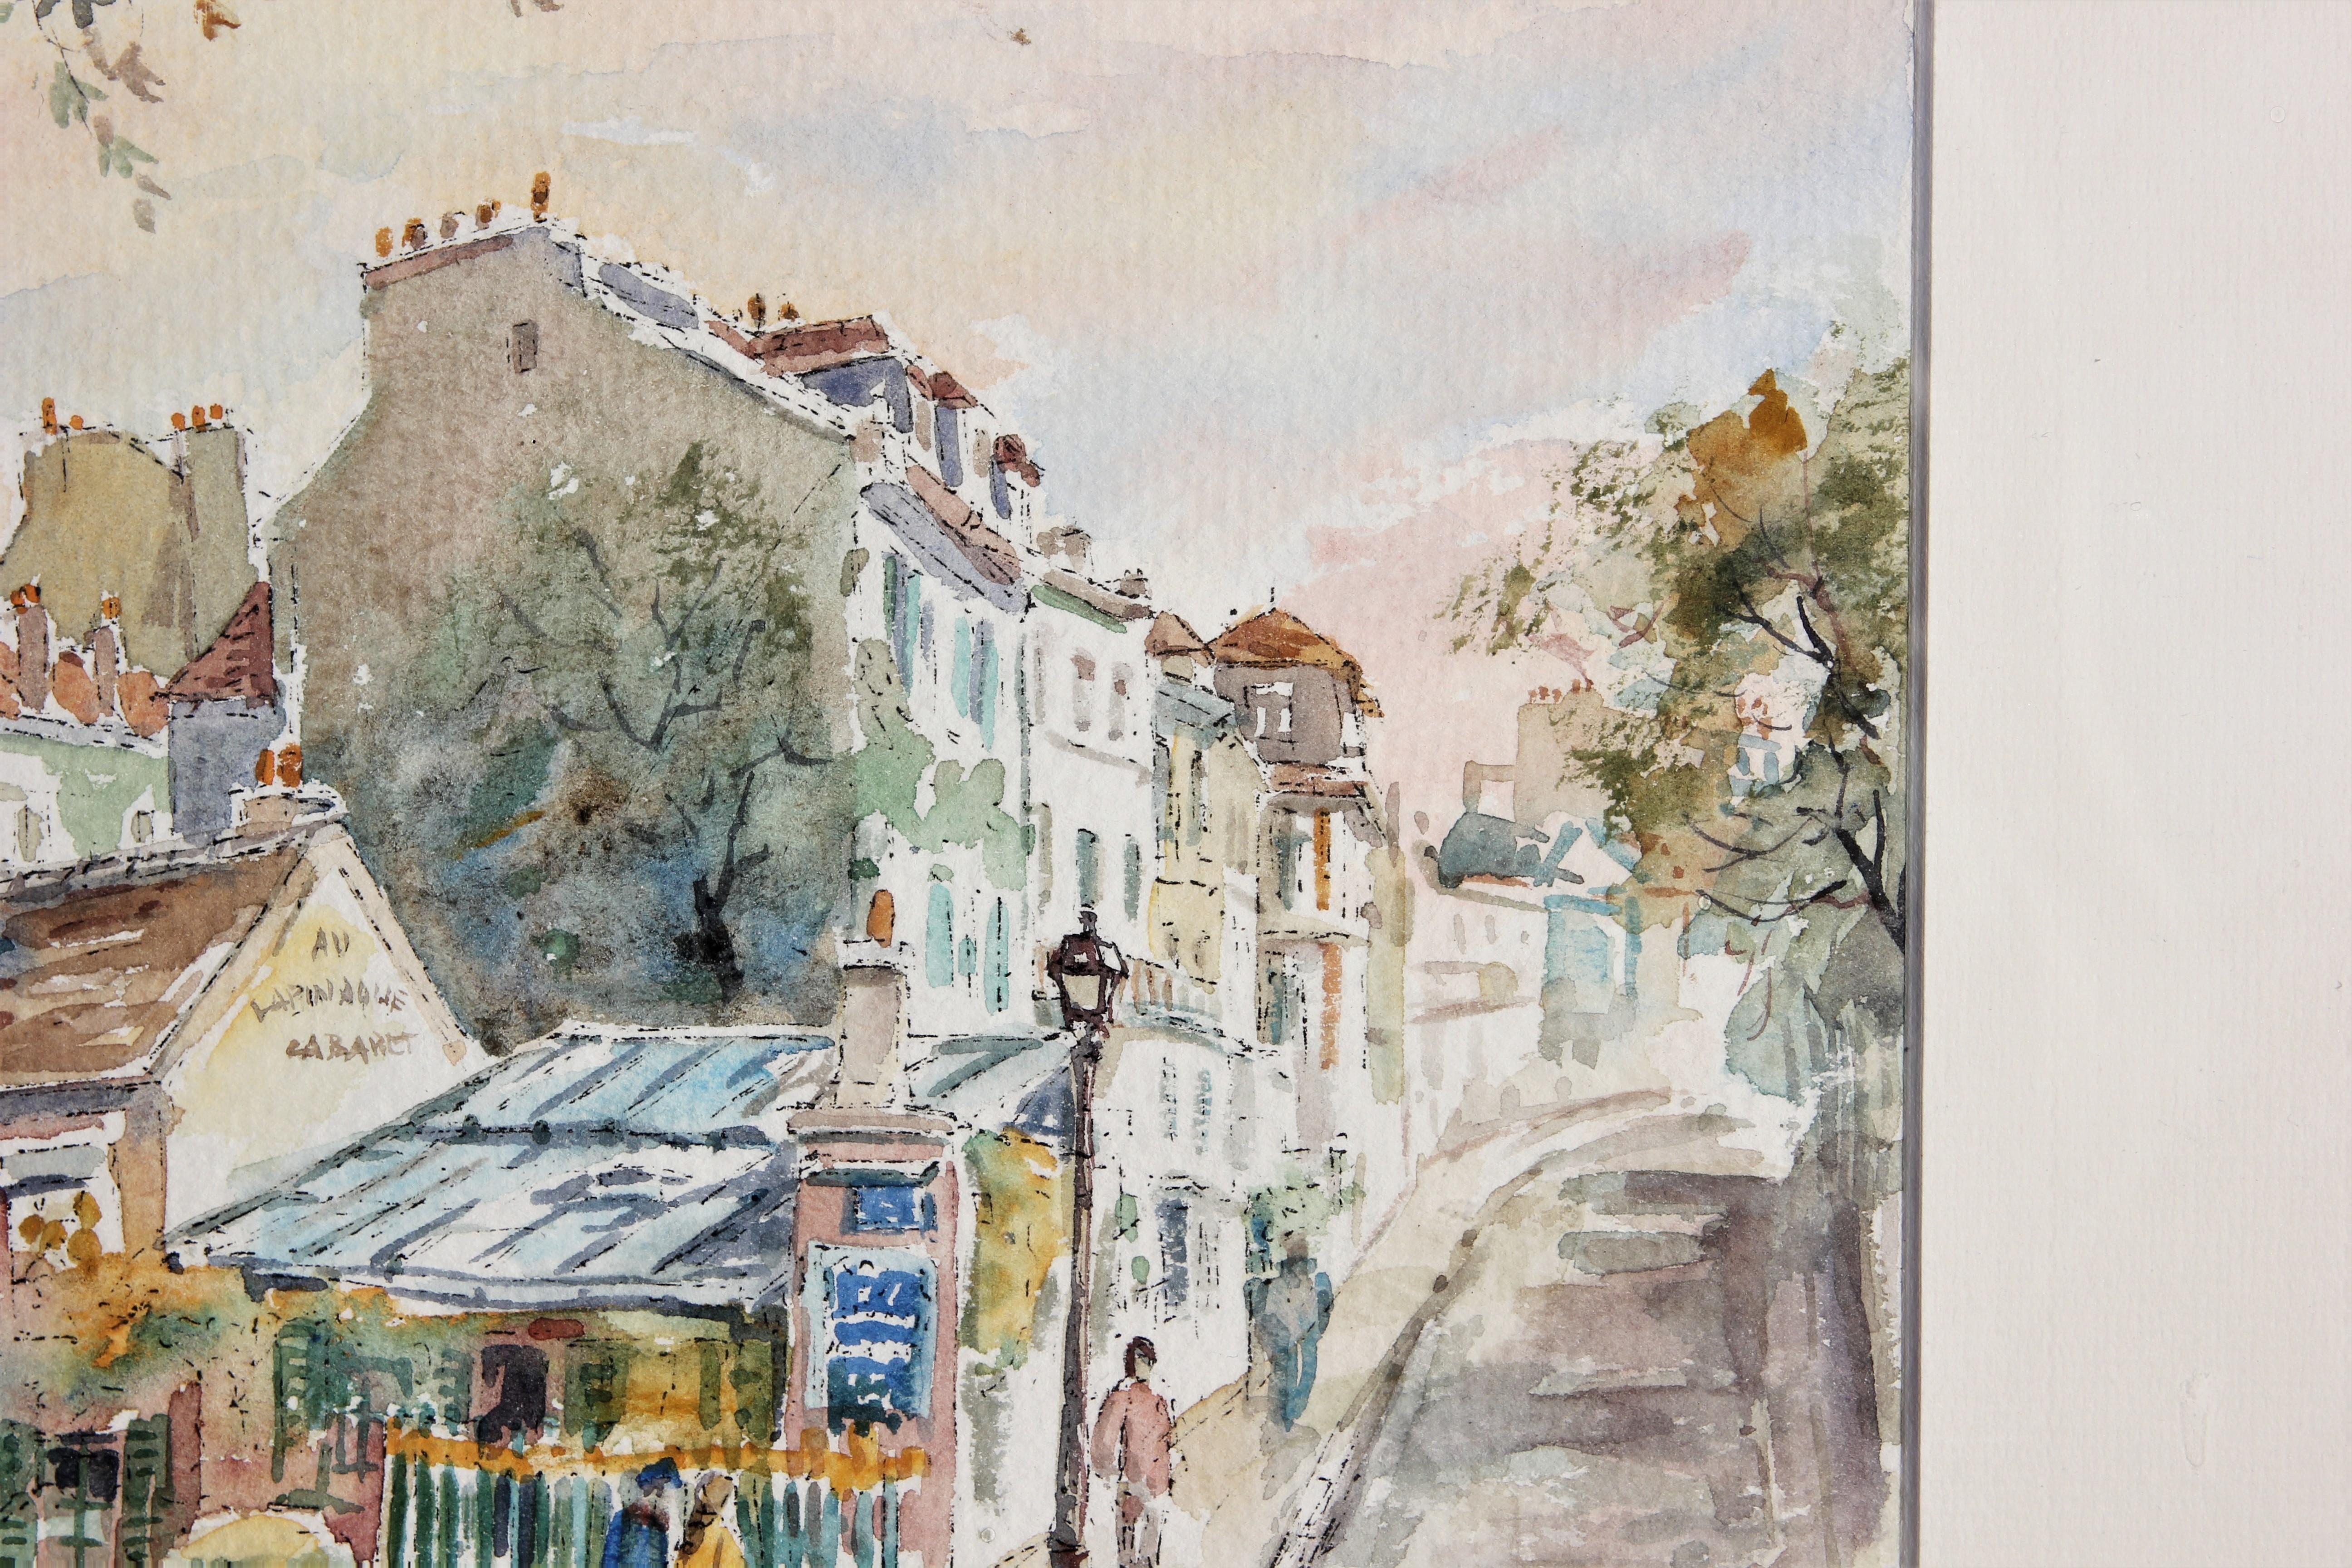 Colorful pastel toned watercolor landscape depicting the historic Au Lapin Agile Cabaret in Montmartre, Paris. Located in the Montmartre area of Paris the Lapin Agile cabaret has been in existence for almost 150 years and this little pastel coloured